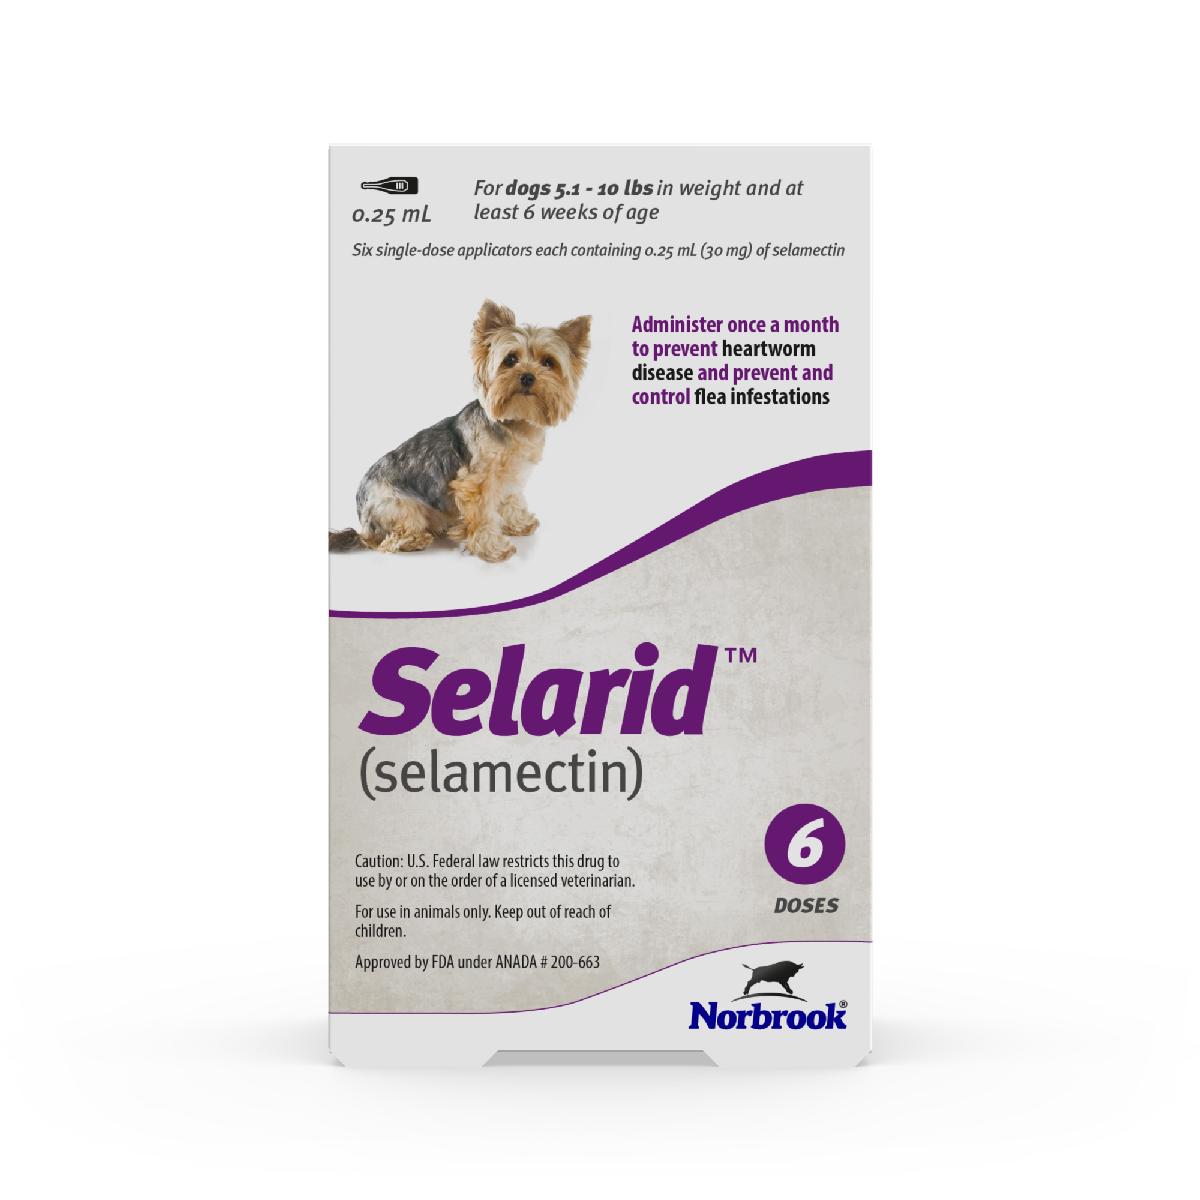 Selarid (selamectin) Topical Parasiticide for Dogs 5.110 lbs, 6 count